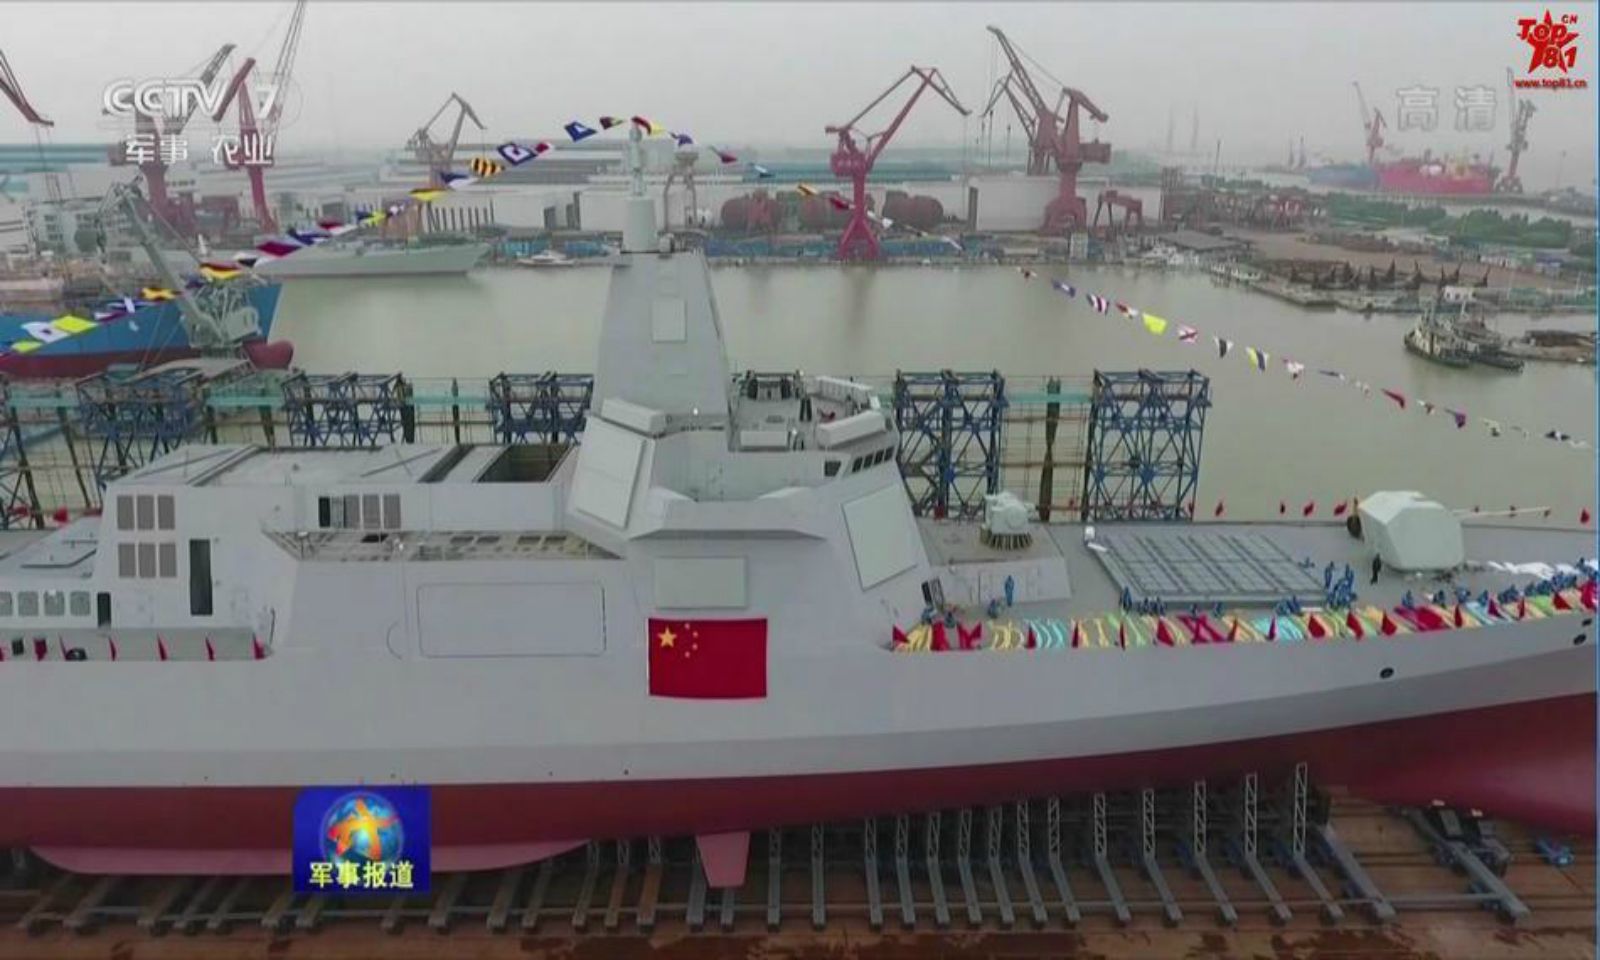 Bigger Than A U.S. Navy AEGIS Cruiser: China Is Building More Type-055s -  Naval News